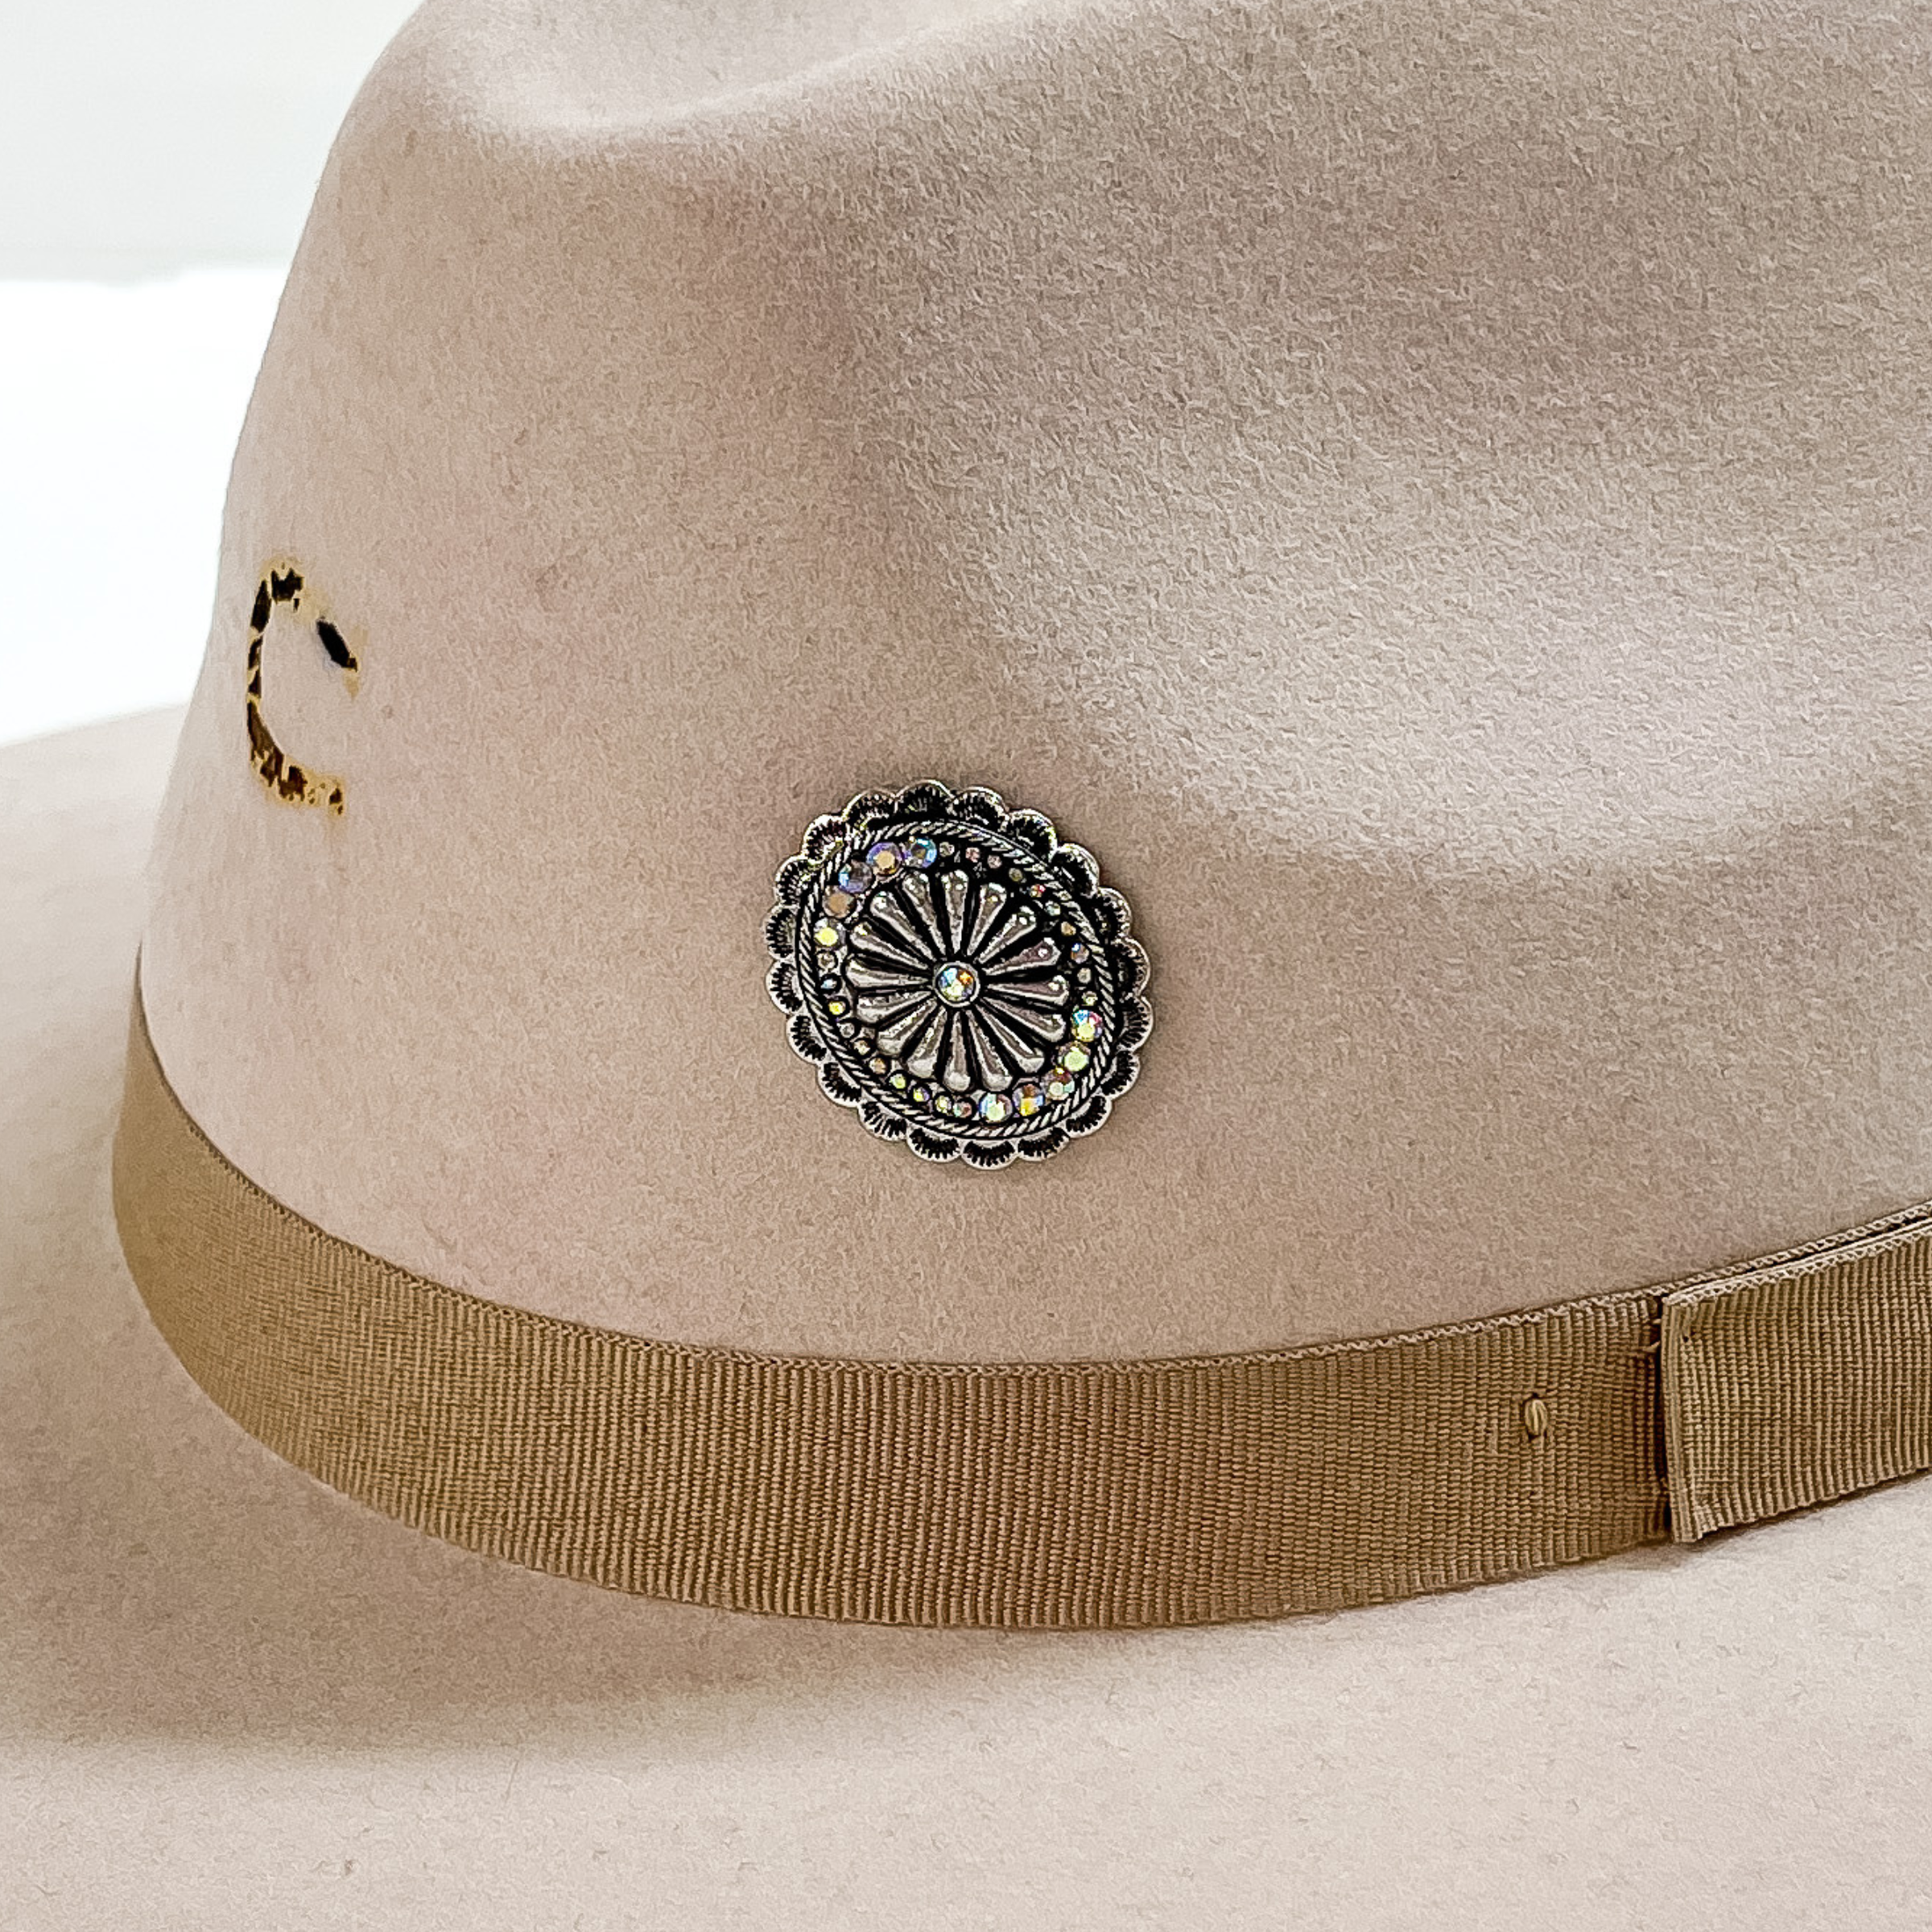 Silver, oval concho with ab crystals hat pin. This hat pin is pictured on a beige hat. 